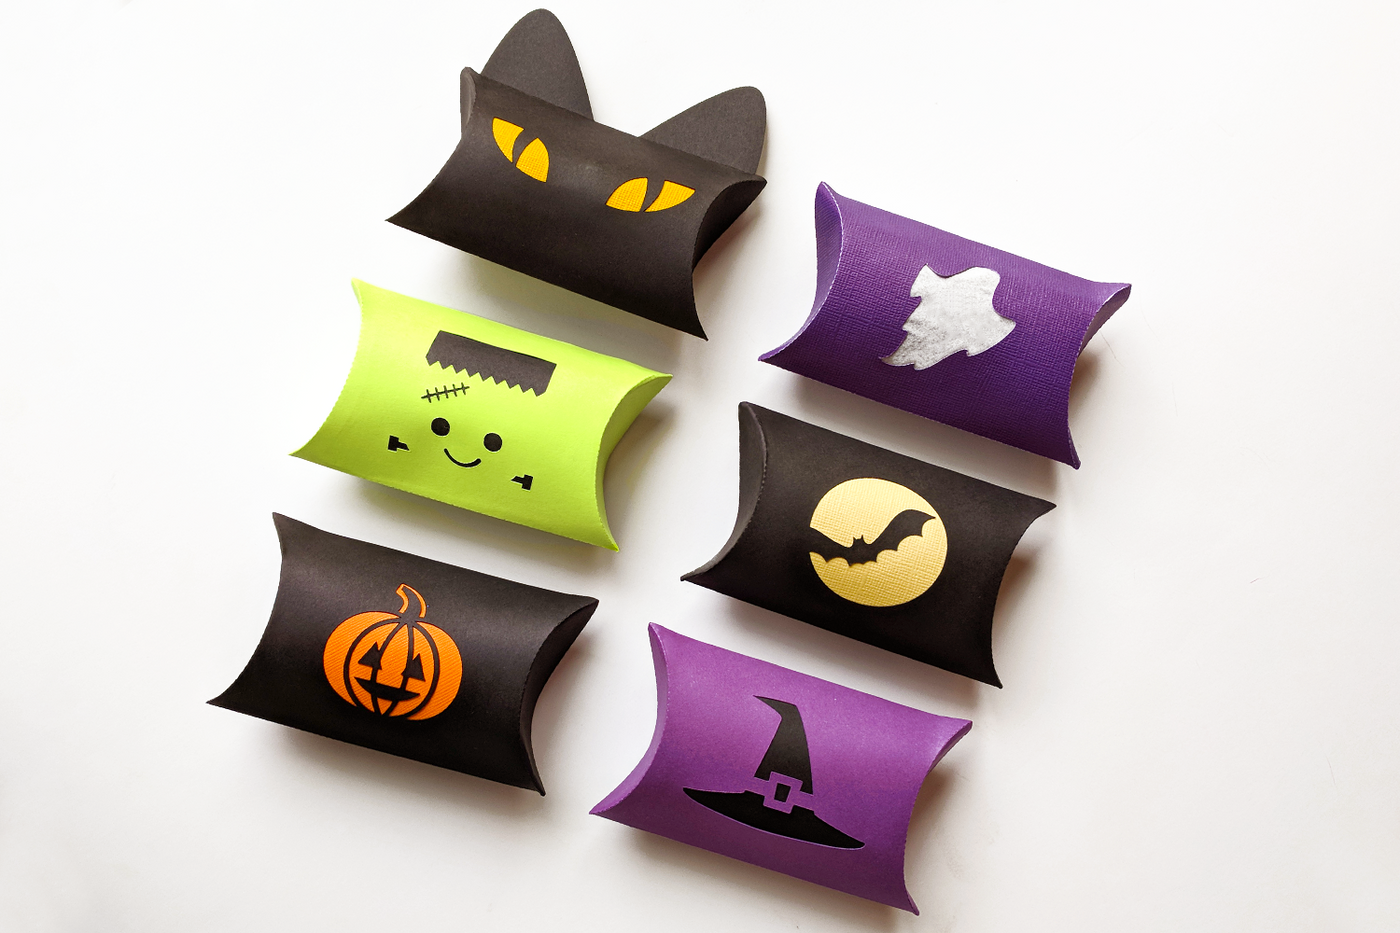 Six pillow boxes in Halloween colors. There is a black cat head, Frankenstein's monster face, a carved pumpkin, ghost, bat in front of a full moon, and witch hat.